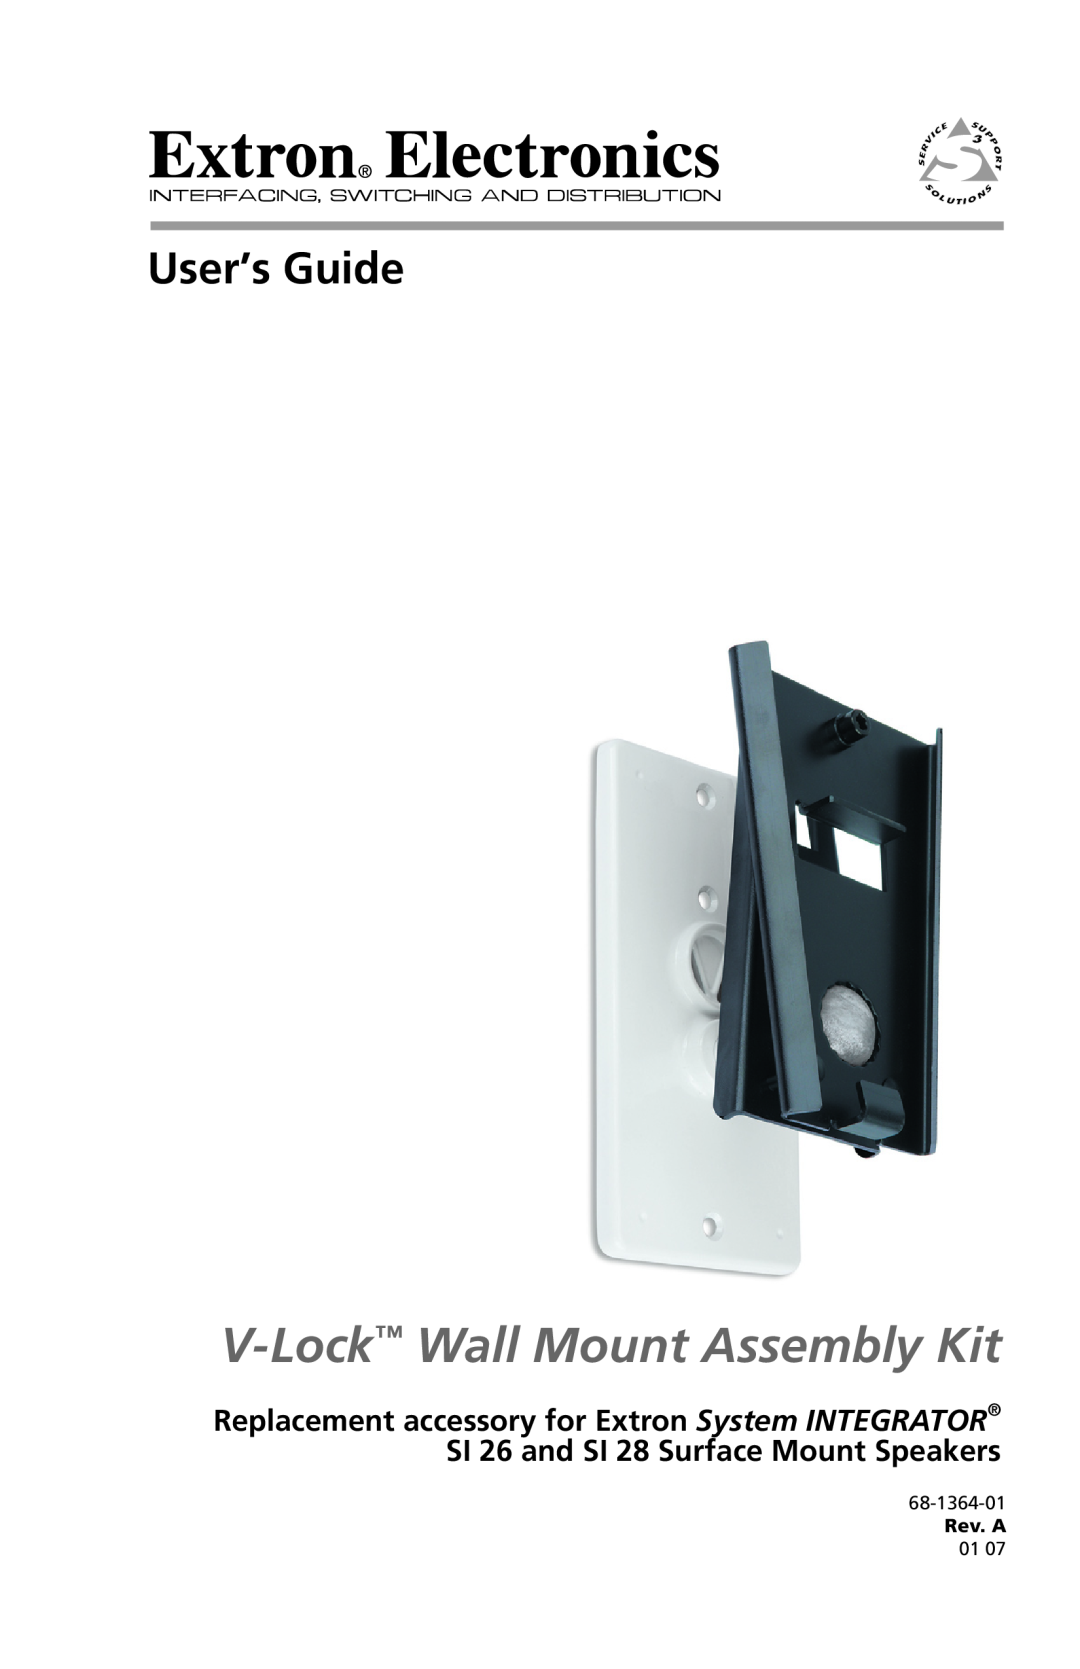 Extron electronic SI 28, SI 26 manual V-Lock Wall Mount Assembly Kit, User’s Guide, 68-1364-01, Rev. A 